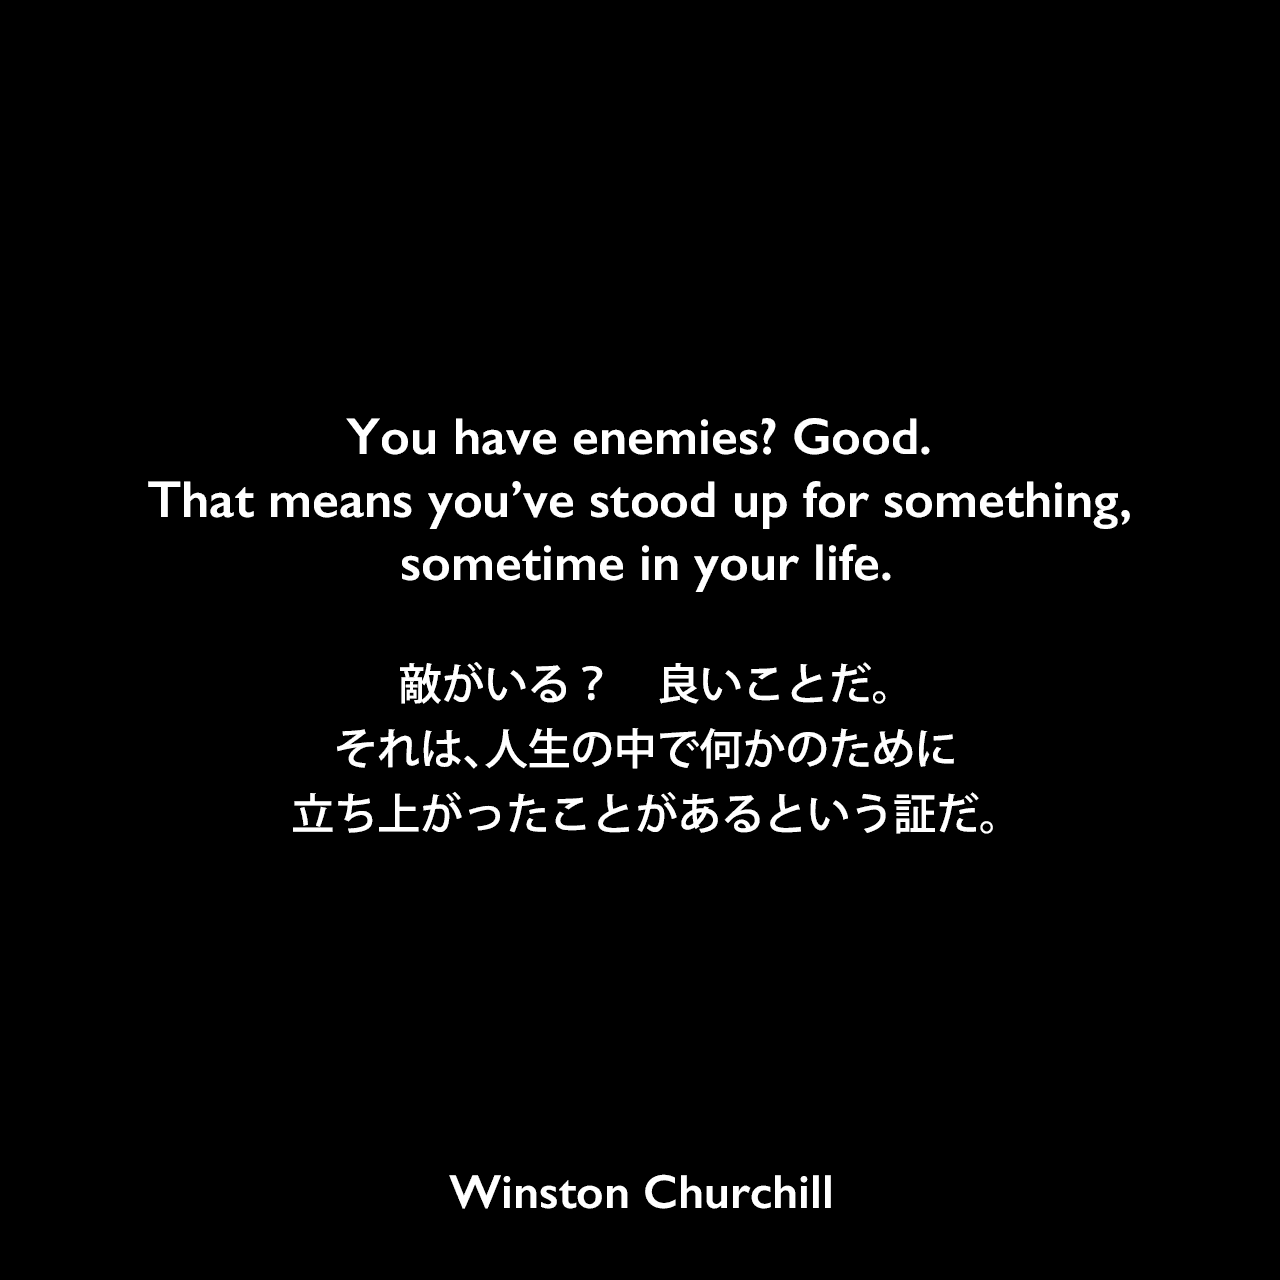 You have enemies? Good. That means you’ve stood up for something, sometime in your life.敵がいる？　良いことだ。それは、人生の中で何かのために立ち上がったことがあるという証だ。Winston Churchill